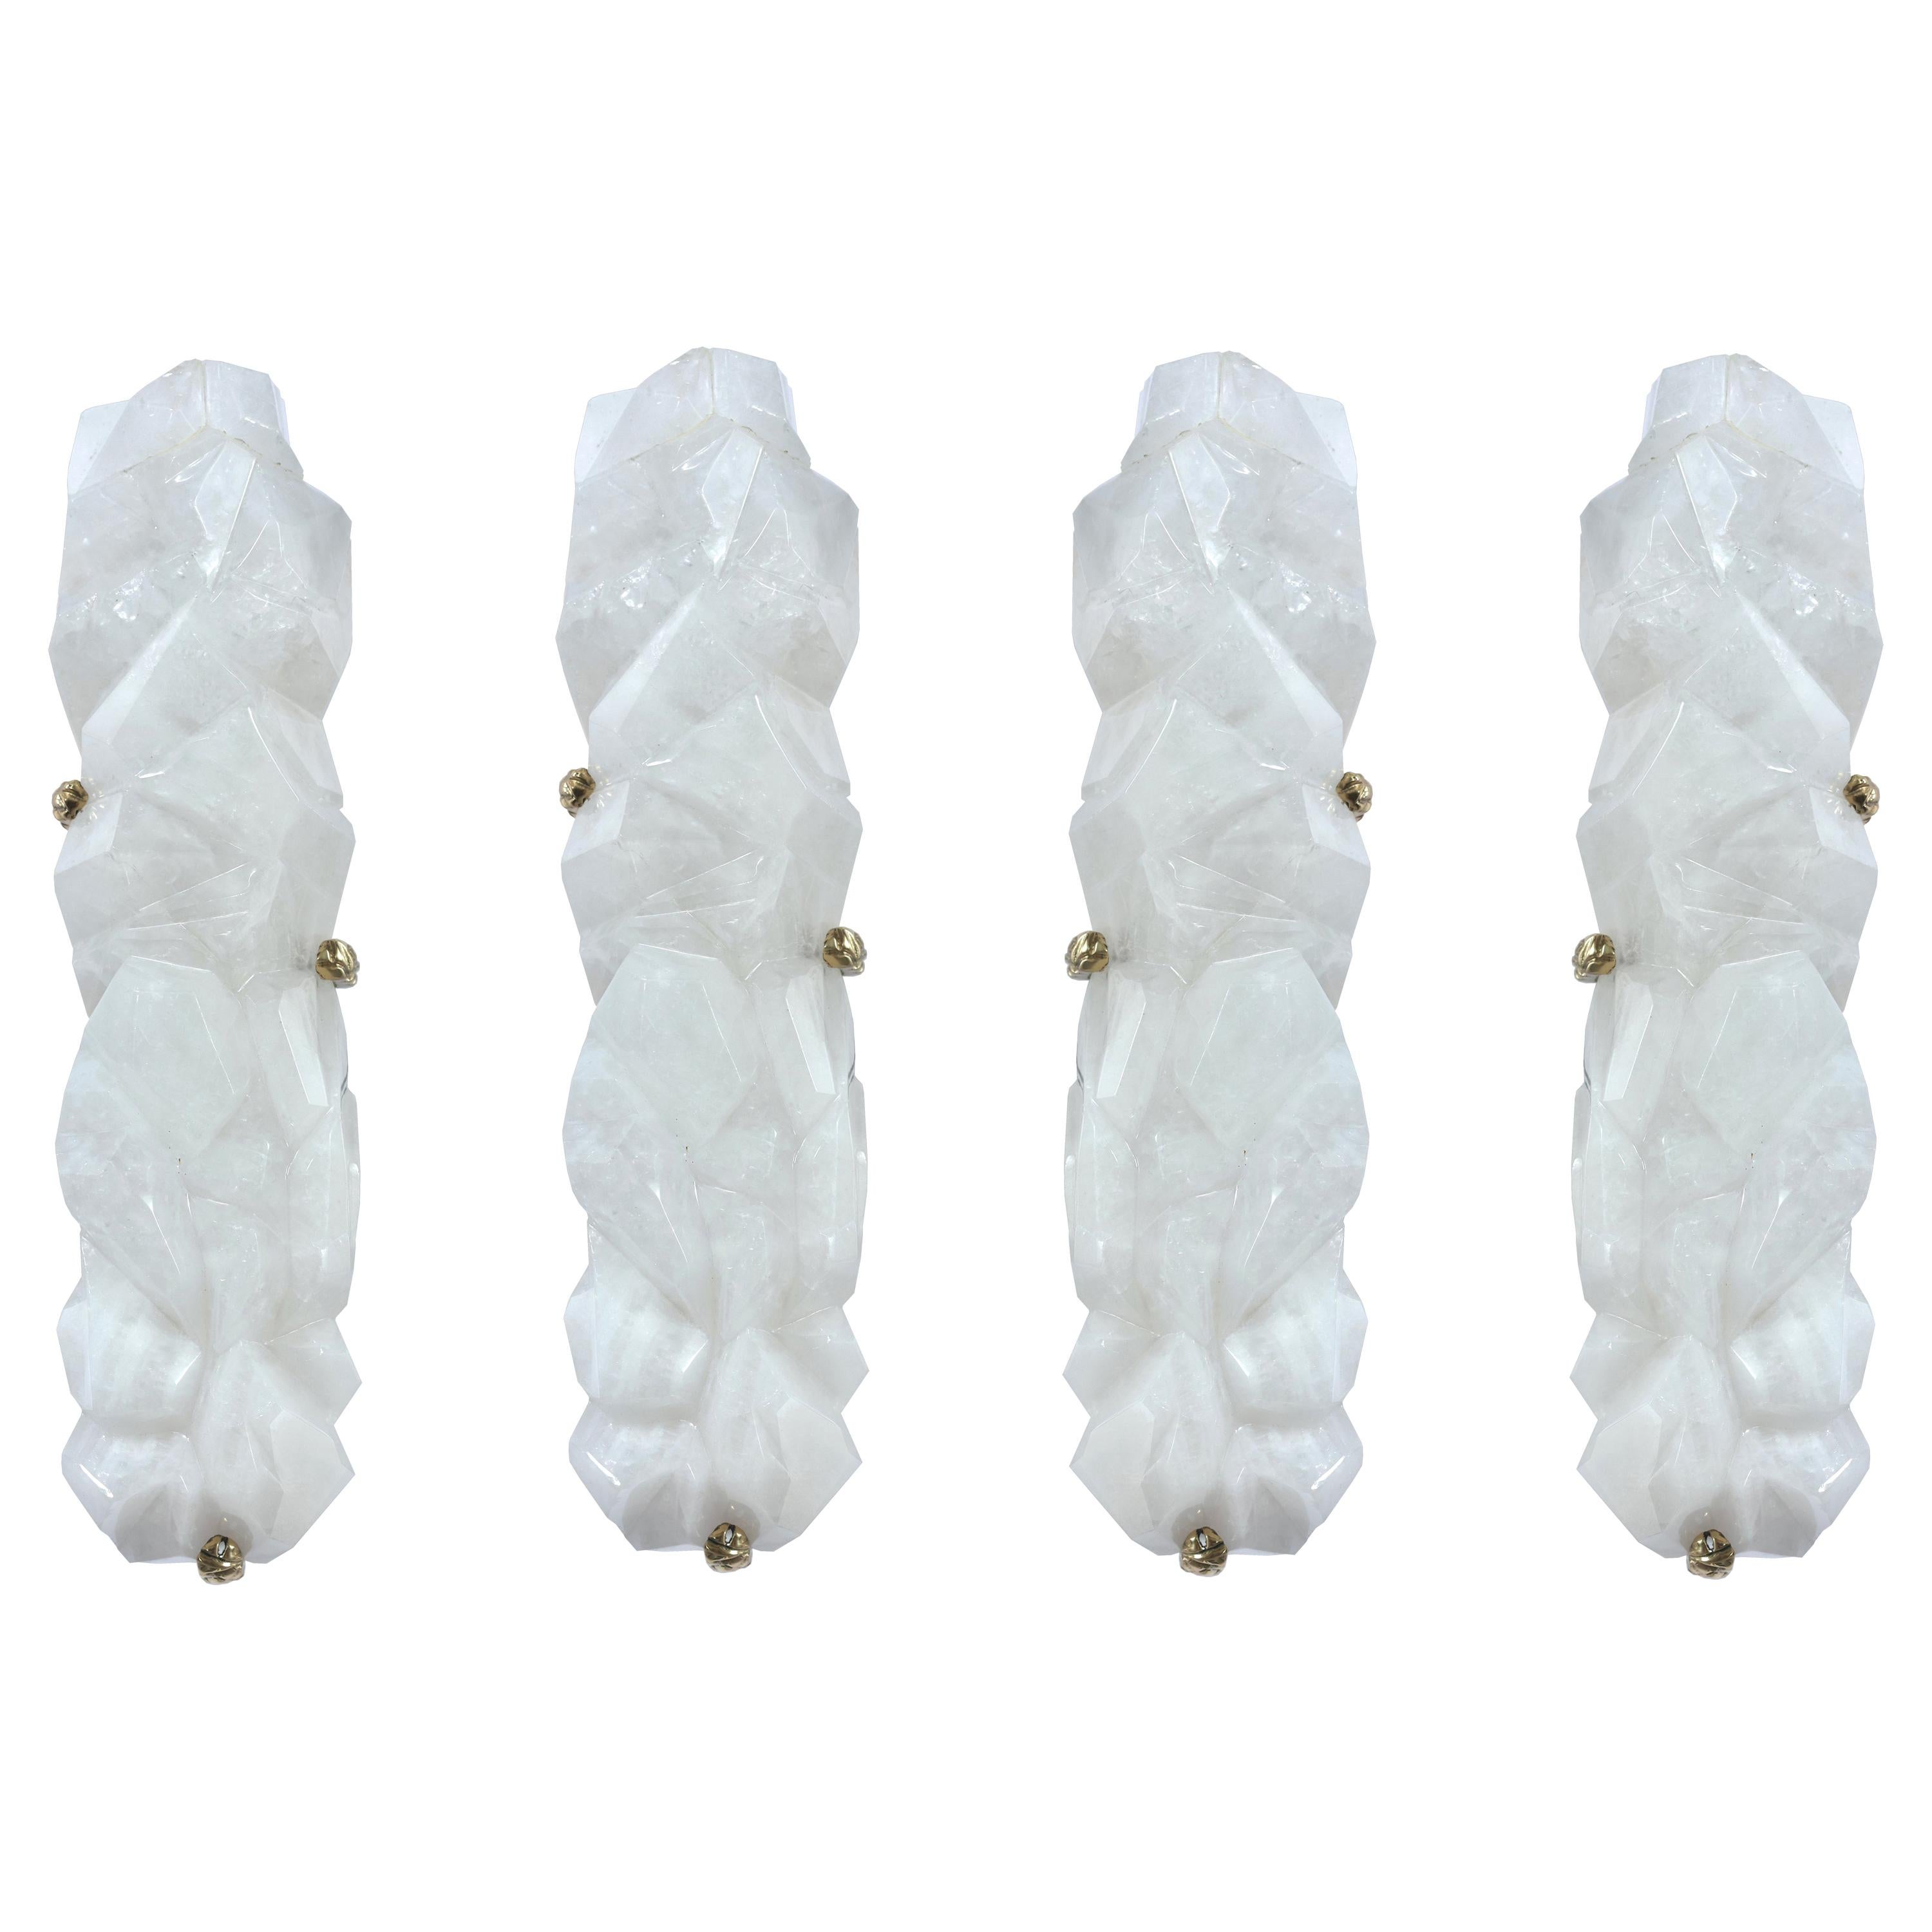 Group of Four Multifaceted Rock Crystal Sconces by Phoenix For Sale